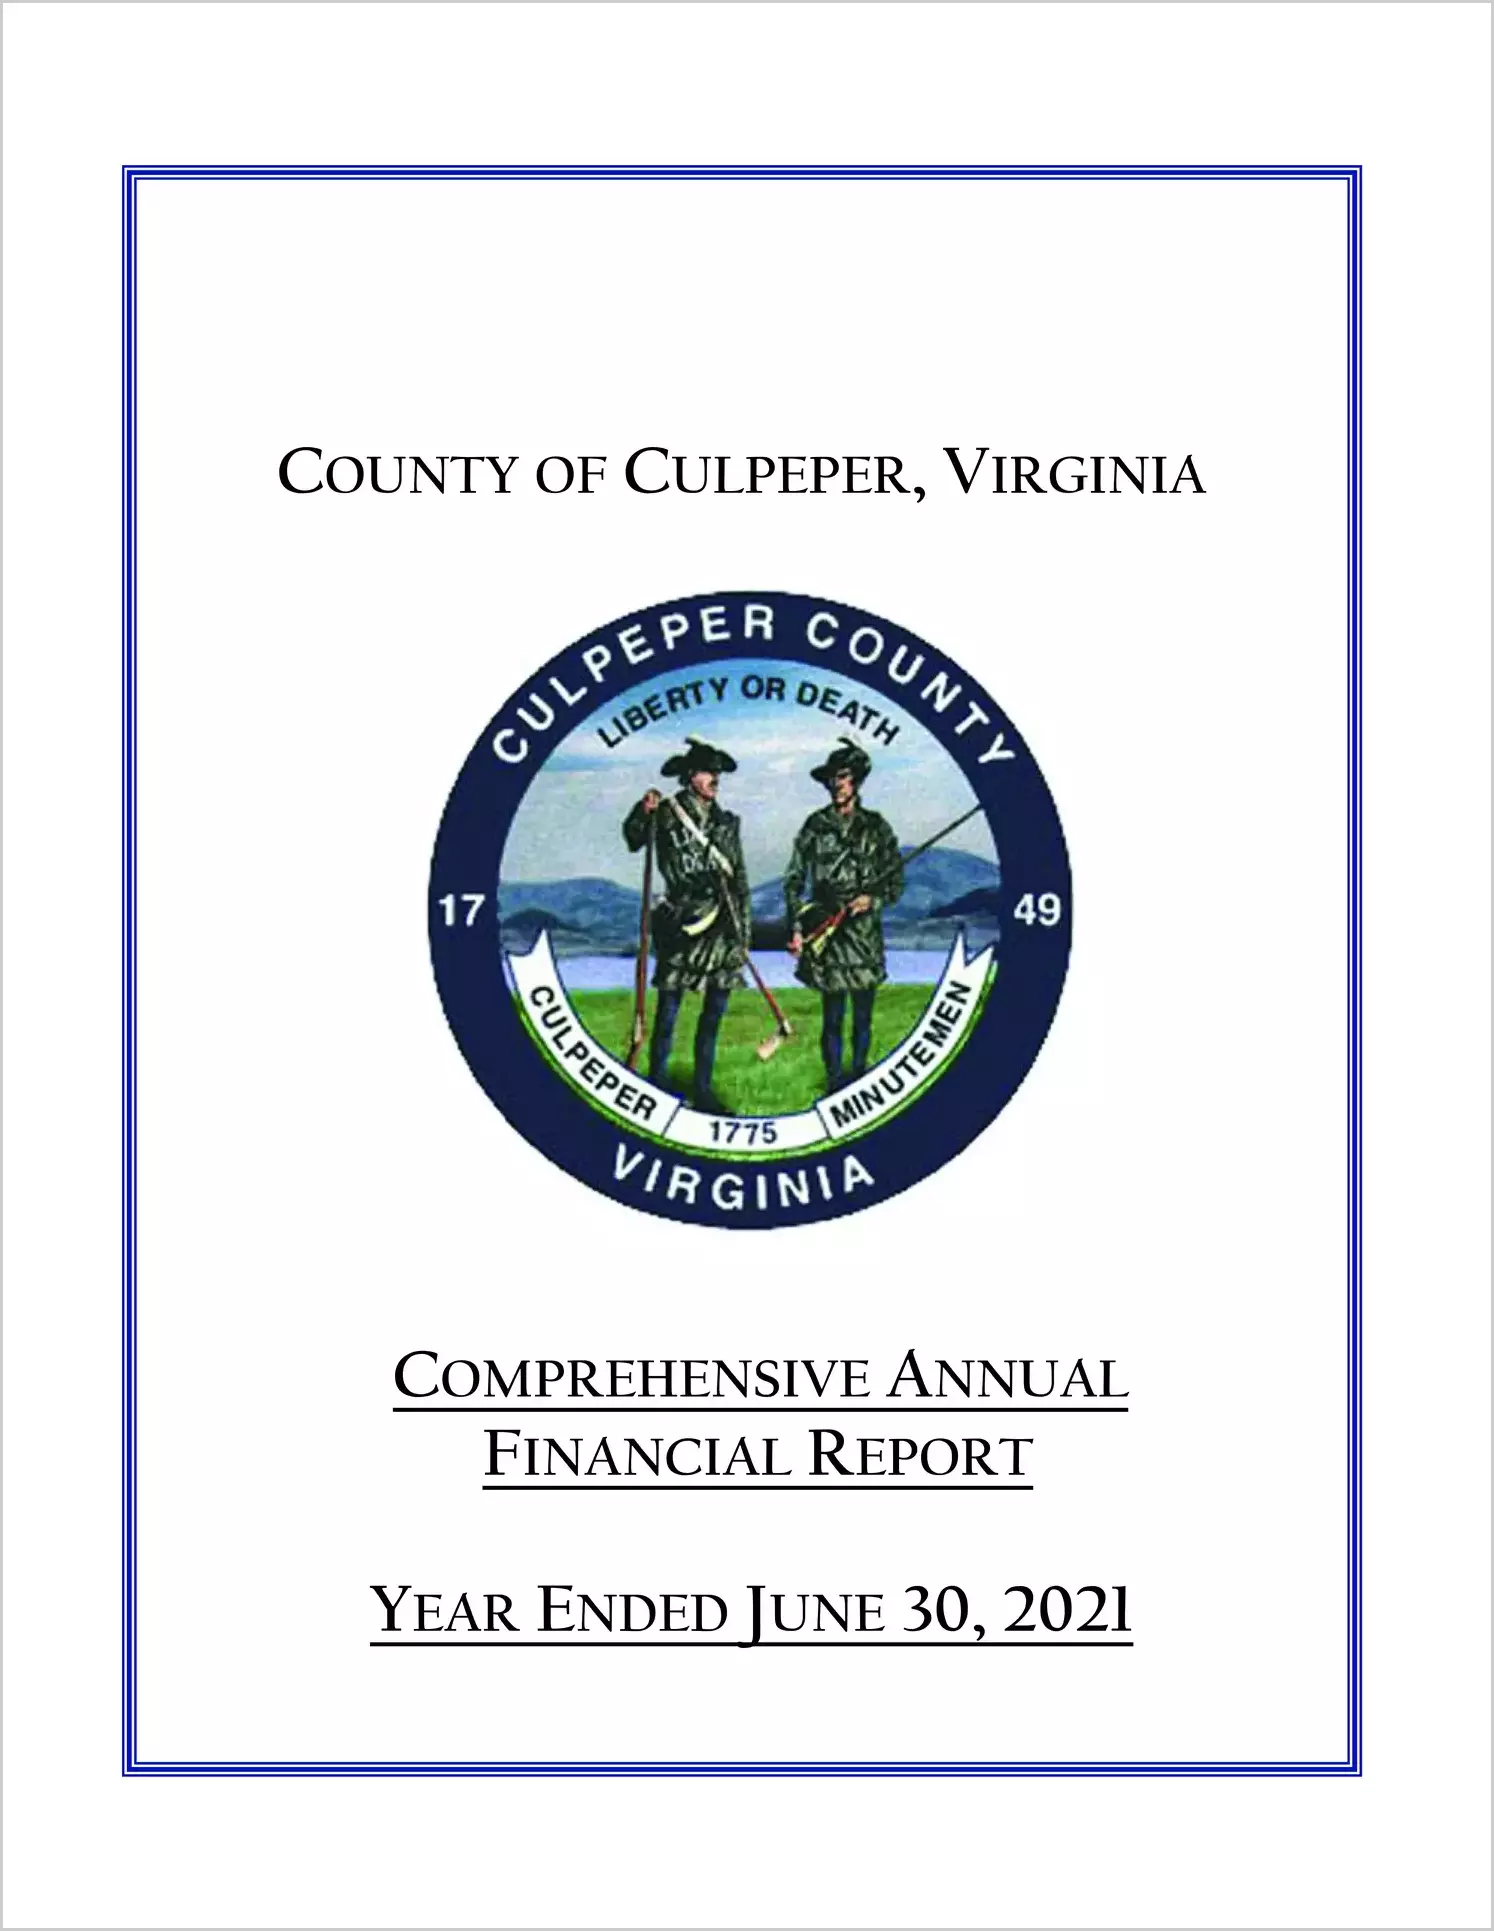 2021 Annual Financial Report for County of Culpeper